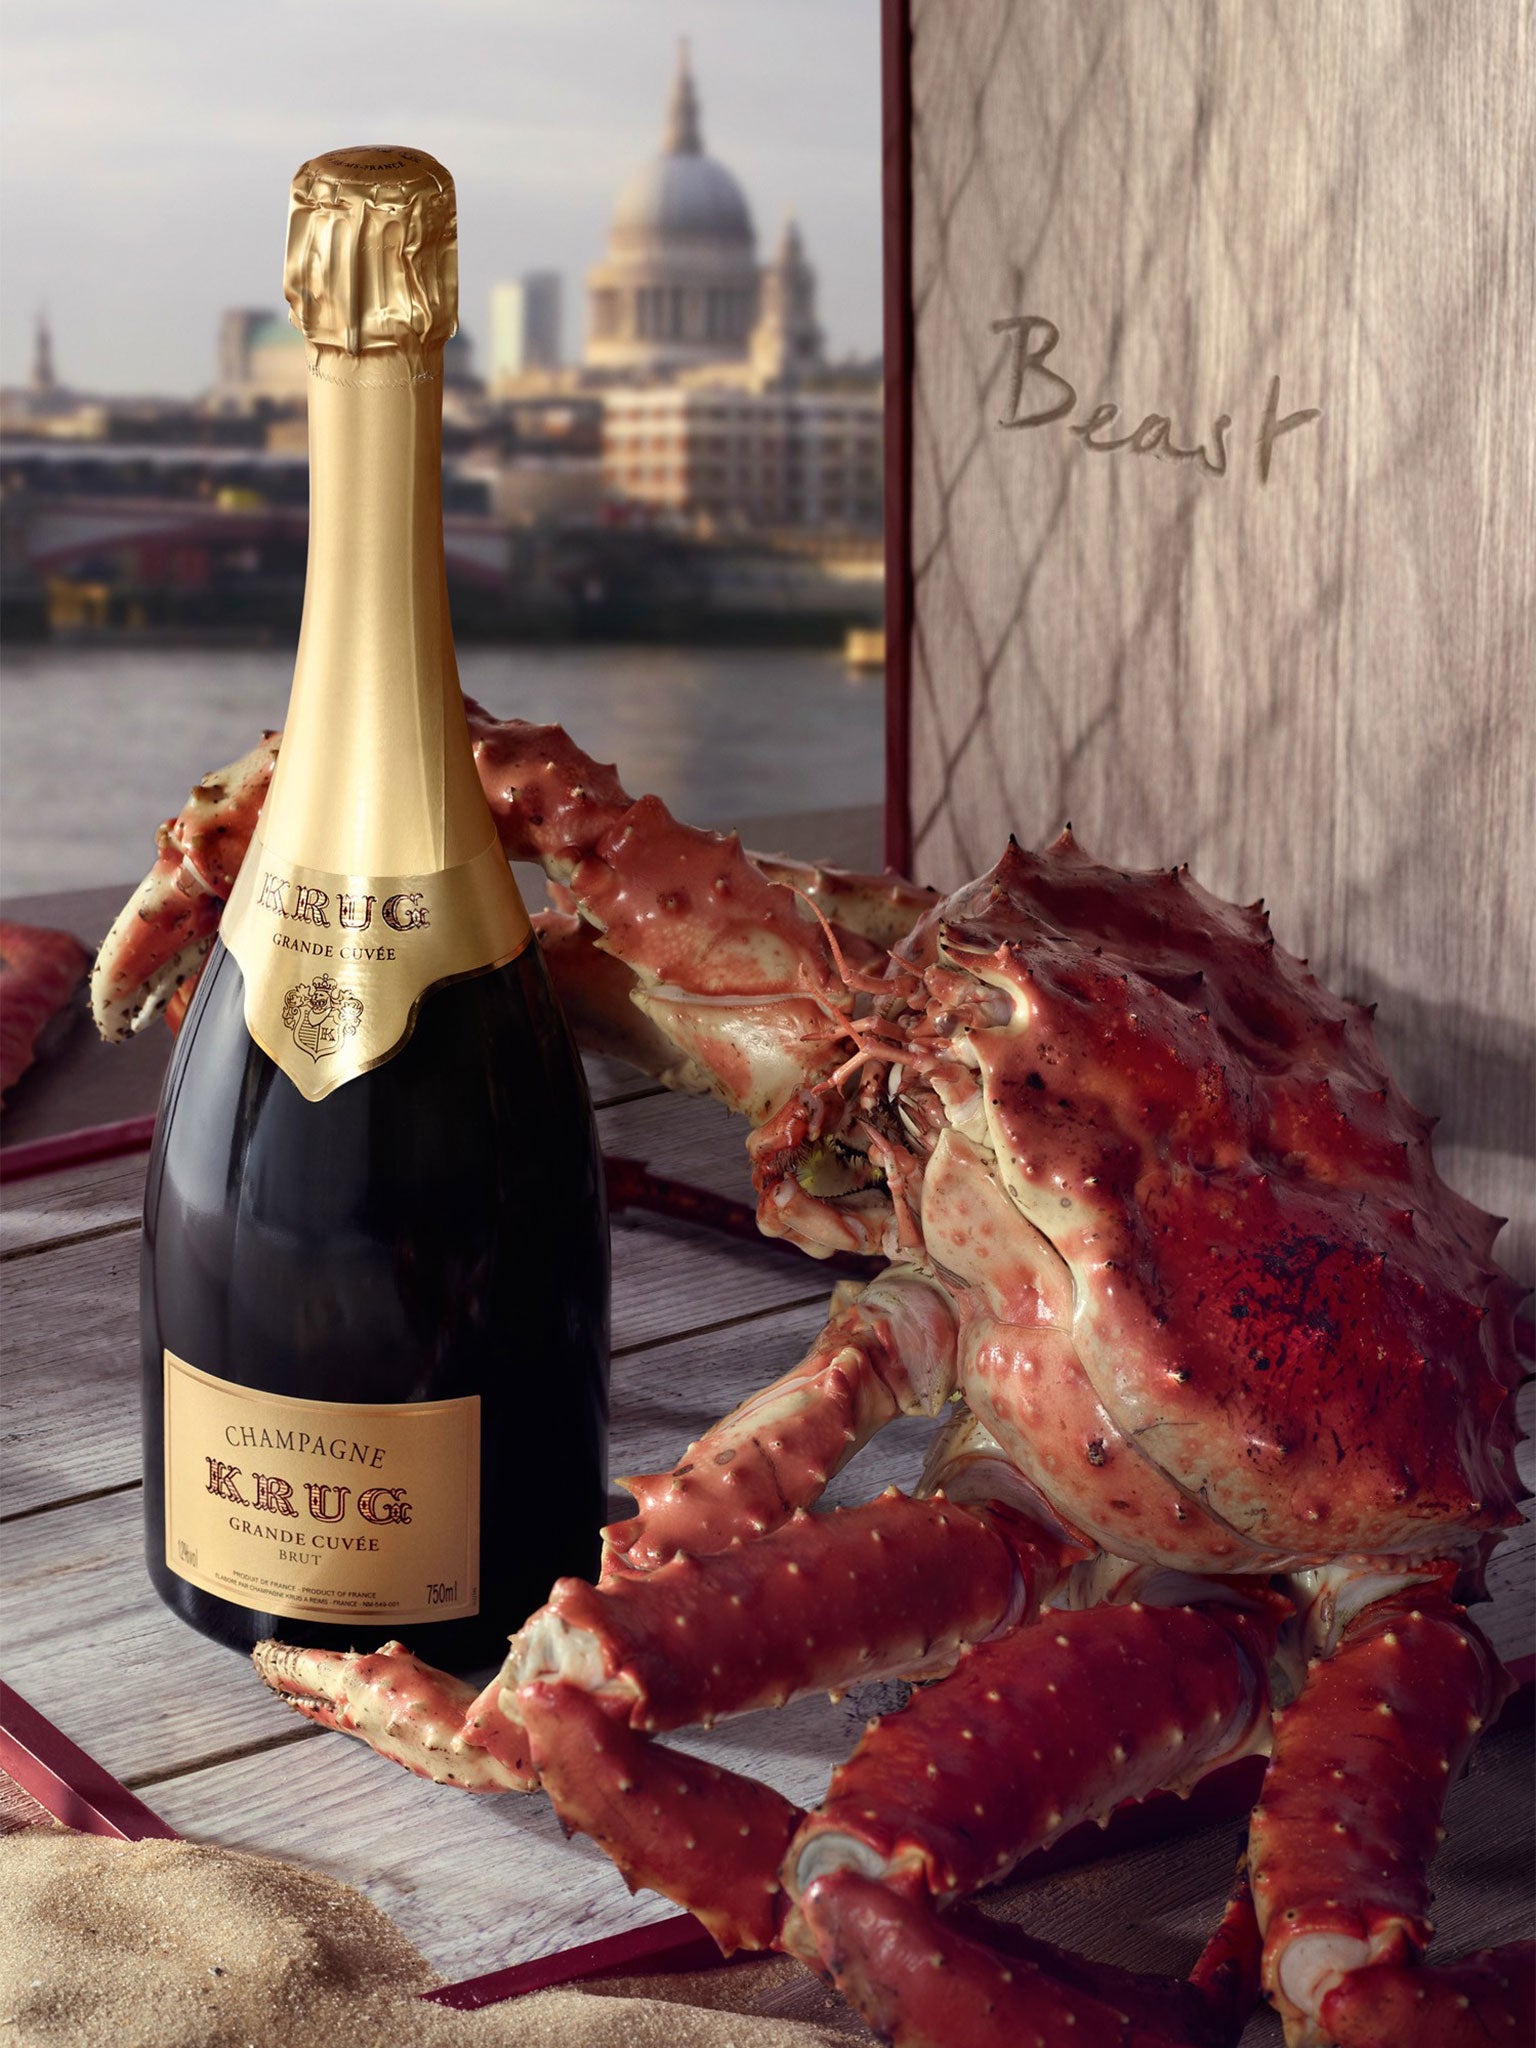 Claw hammered: combine champagne and crustaceans at the Krug and Beast pop-up